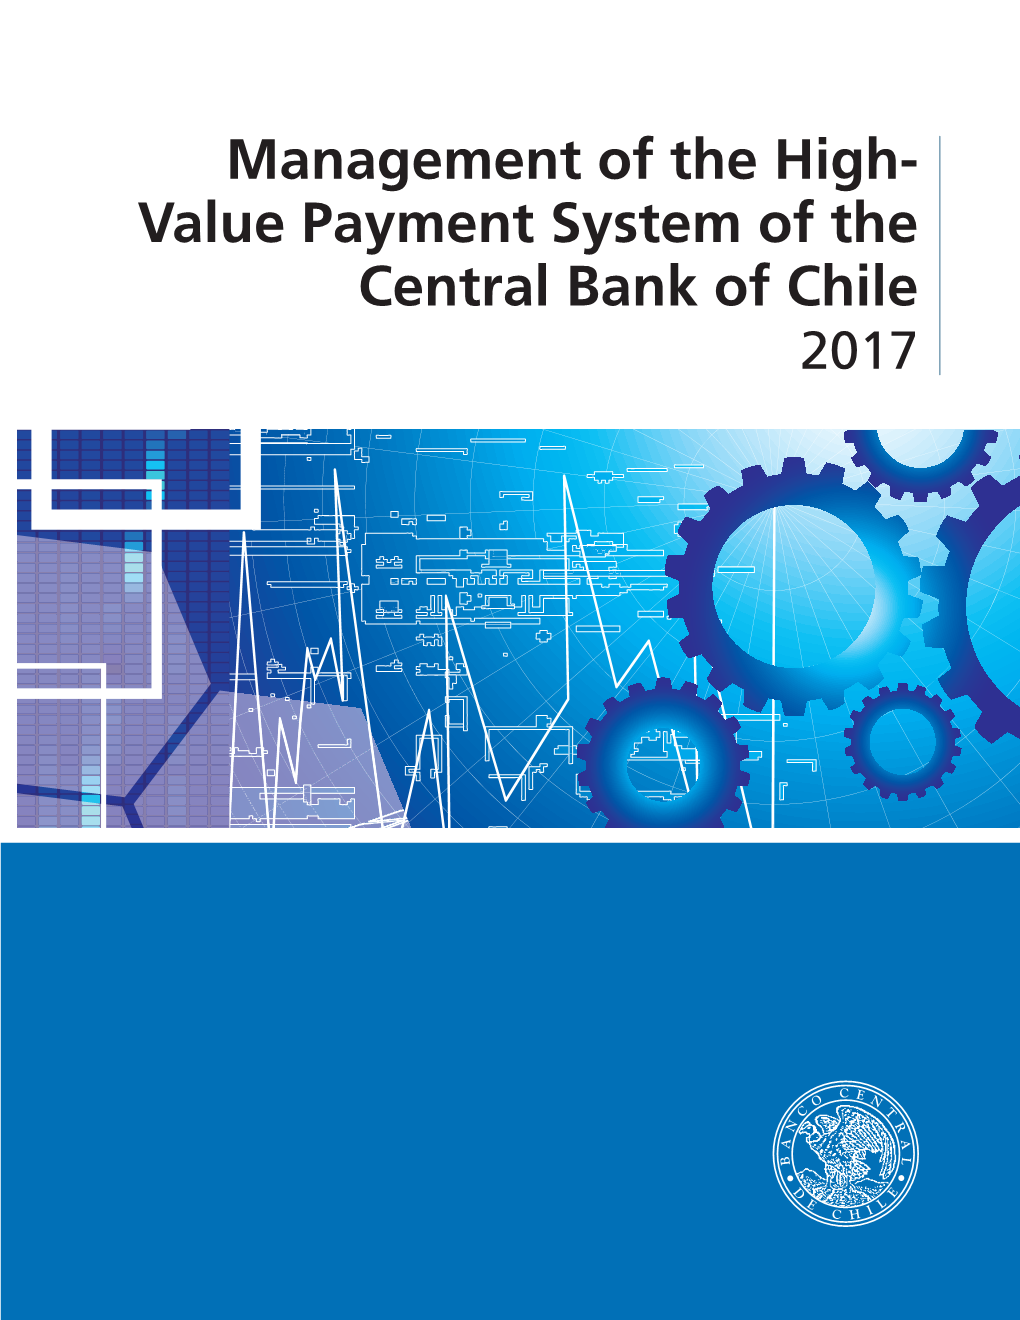 Management of the High- Value Payment System of the Central Bank of Chile 2017 Management of the High- Value Payment System of the Central Bank of Chile 2017